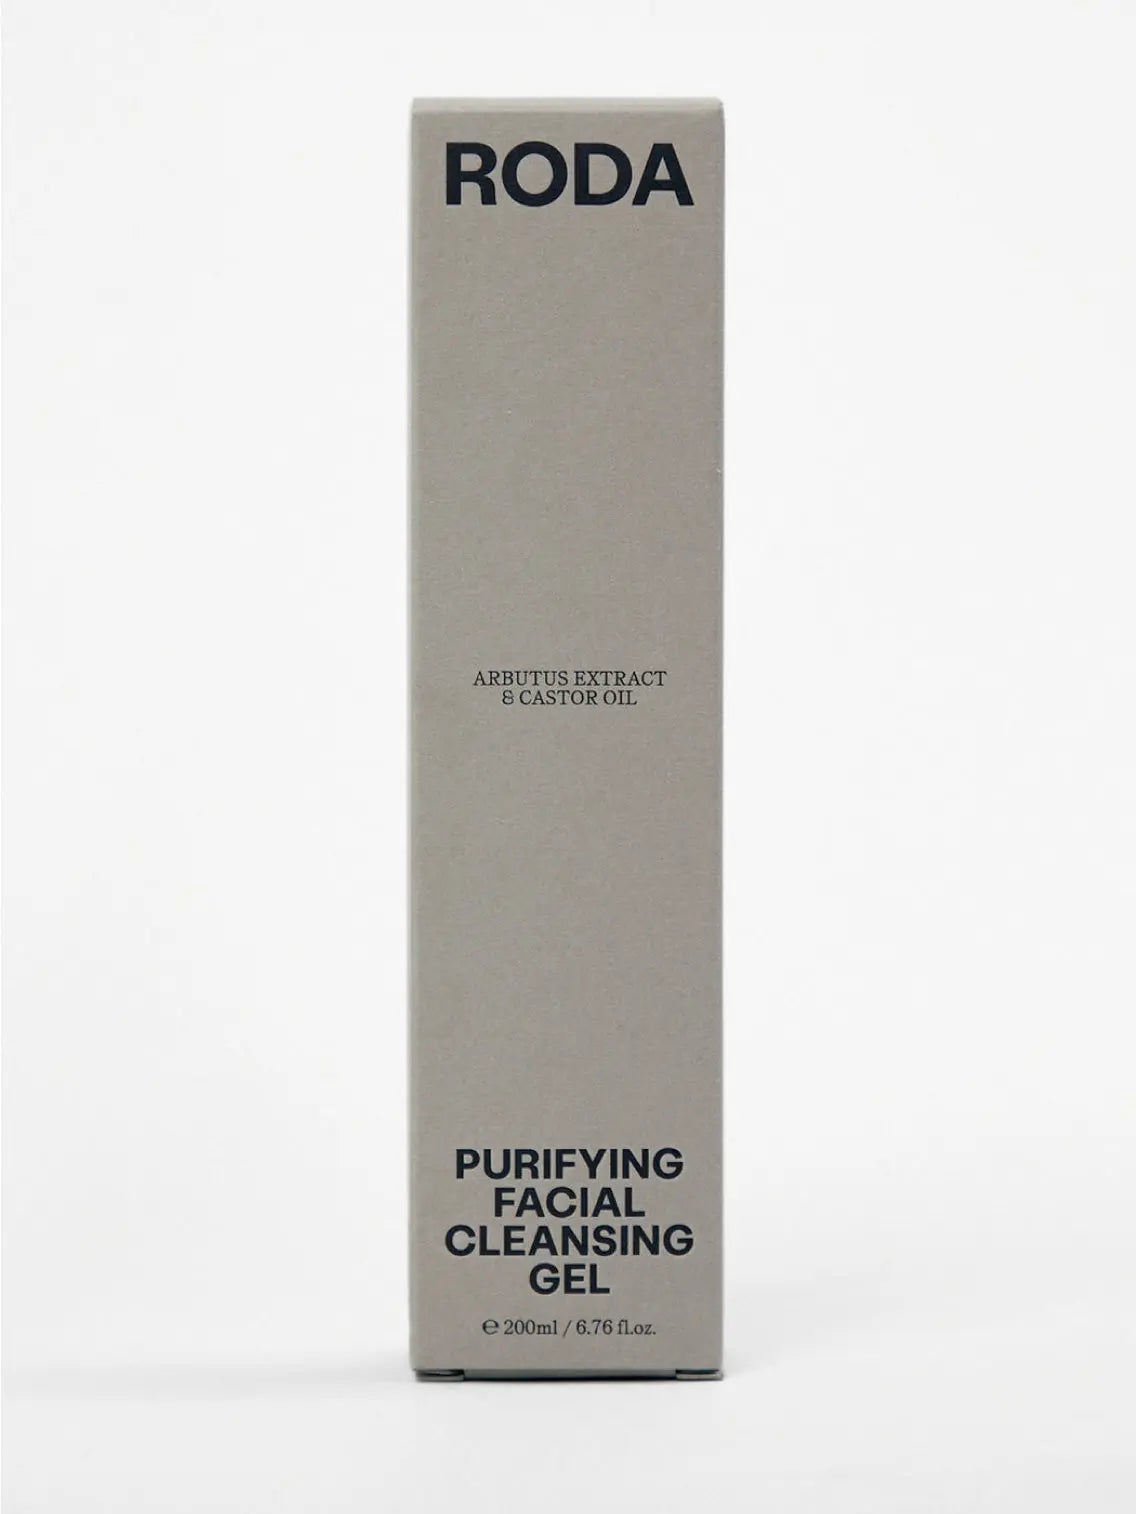 A white pump bottle with a black cap is labeled with "Roda" at the top and "Purifying Facial Cleansing Gel" at the bottom. The text also mentions "Arbutus Extract & Castor Oil." This 200ml (6.76 fl. oz.) product, popular in many Barcelona stores, ensures a thorough cleanse for your skin.